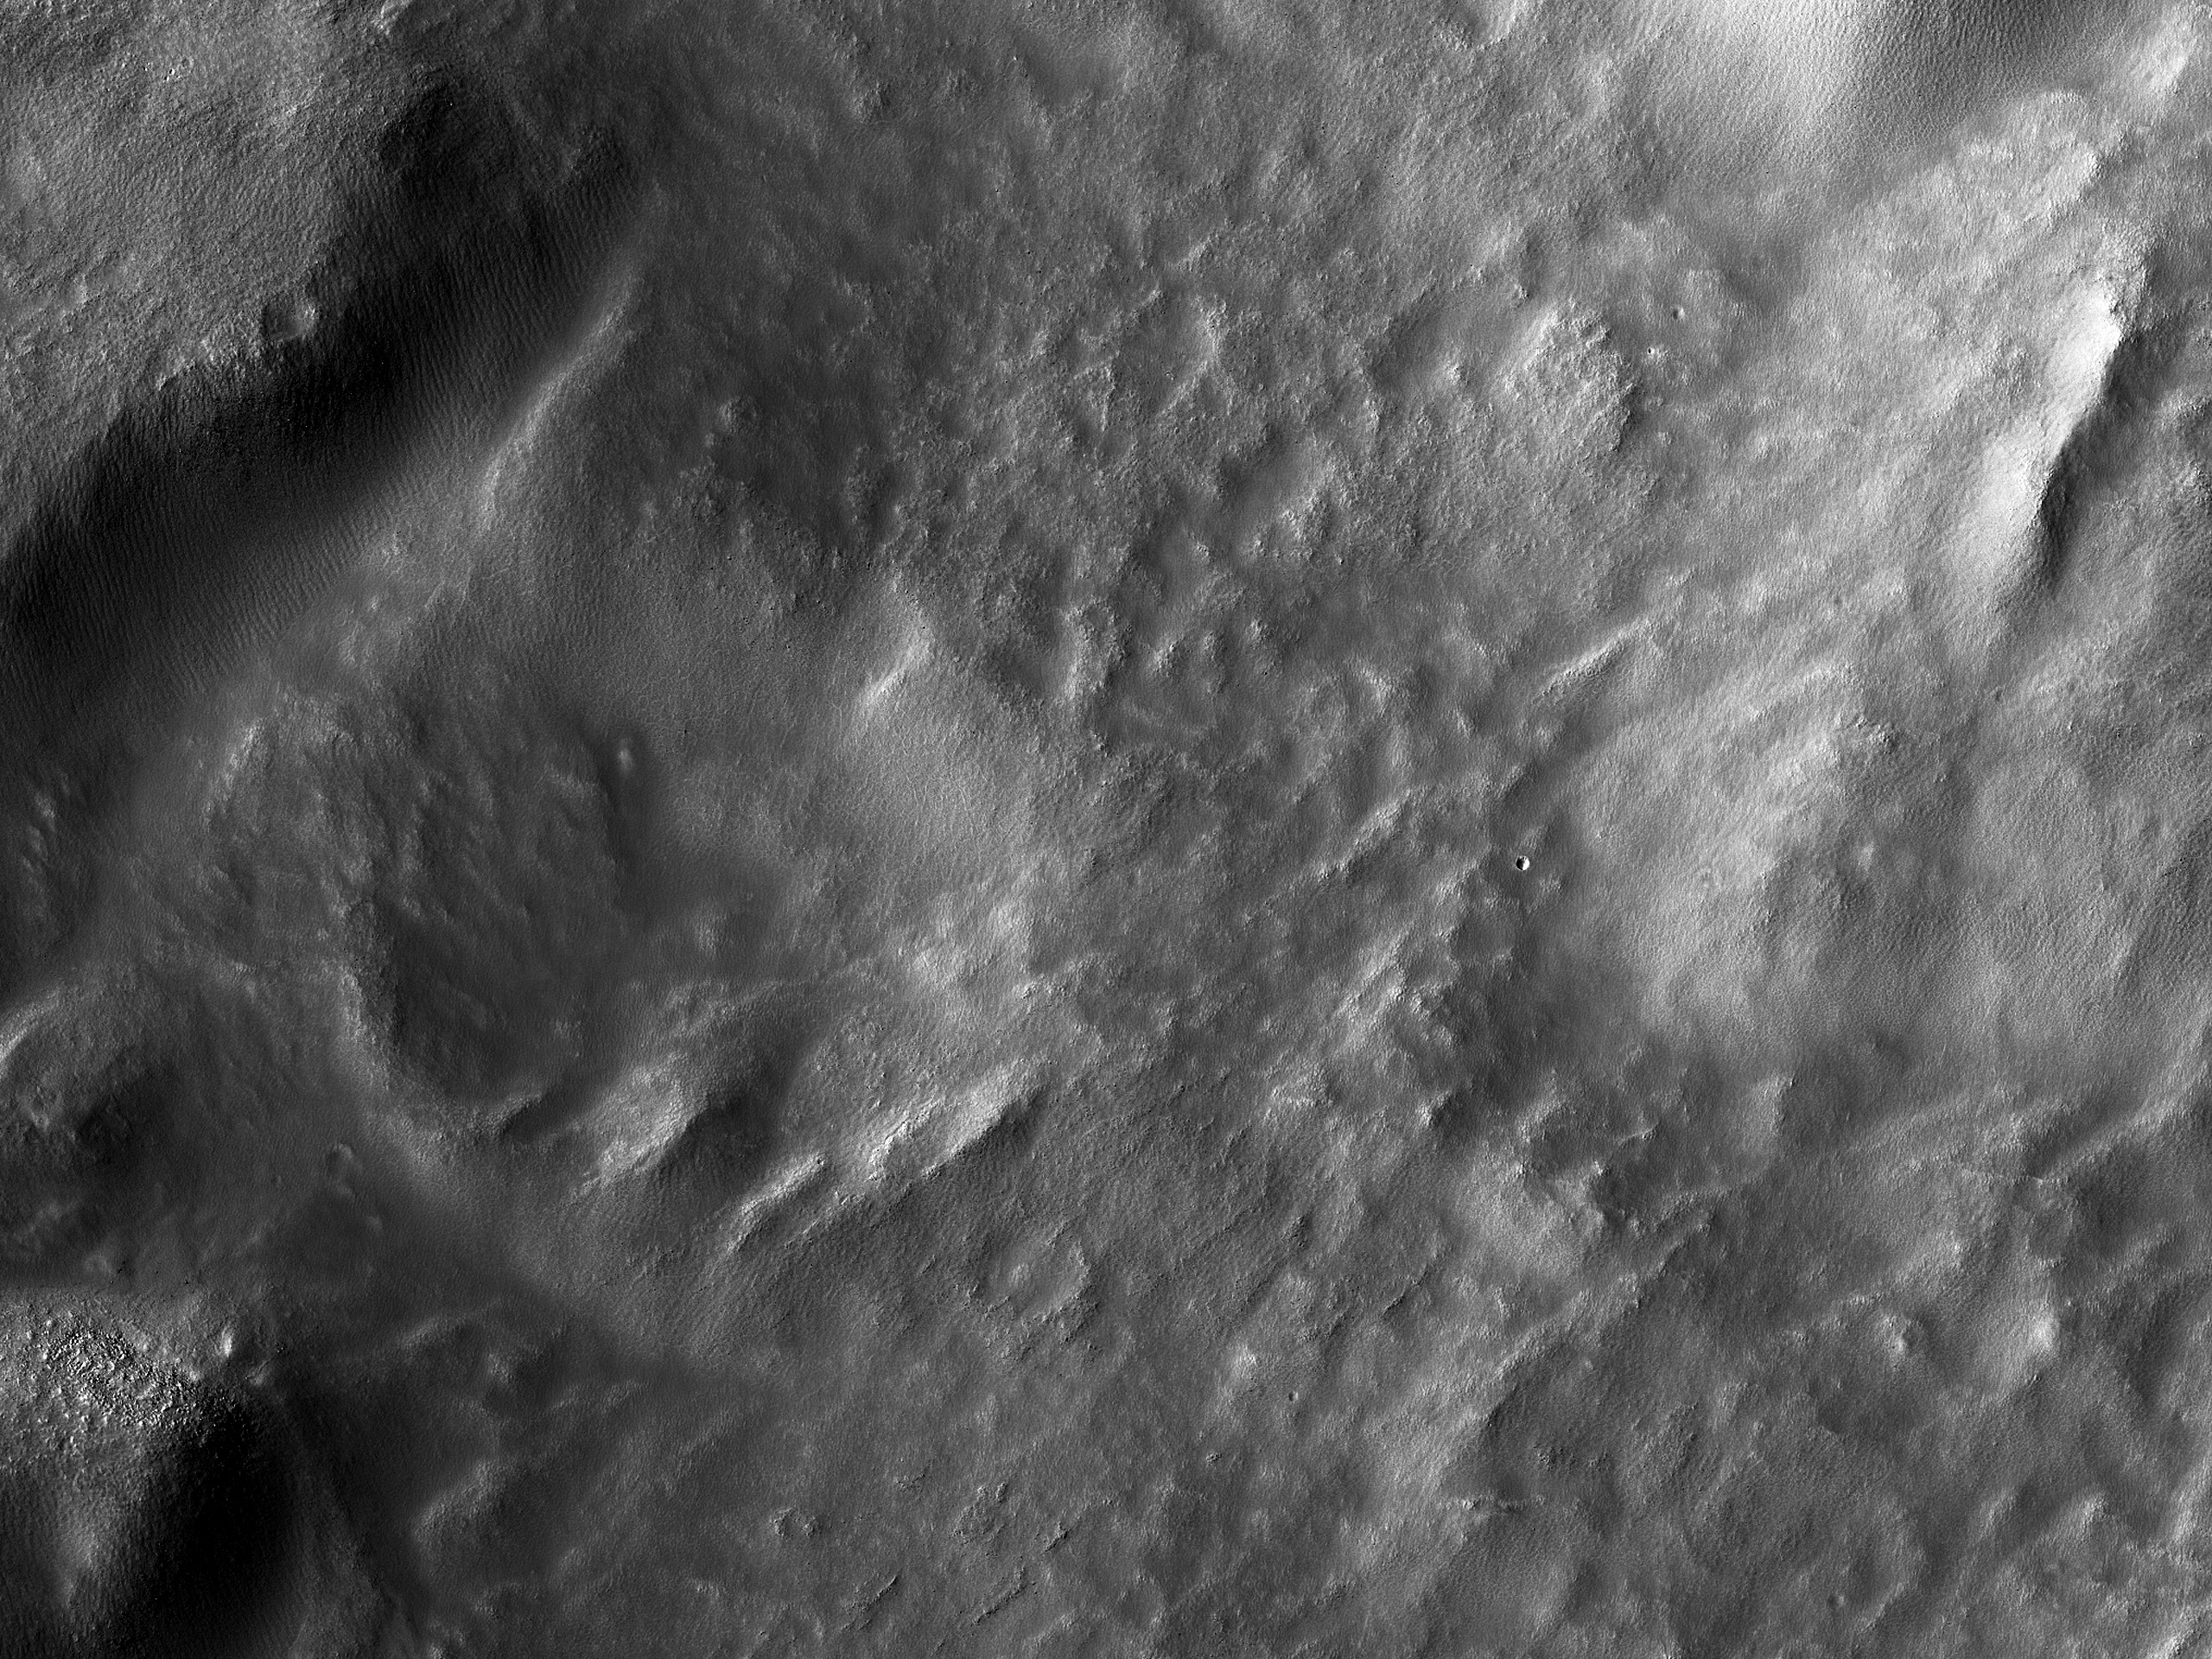 A Depression in Hussey Crater